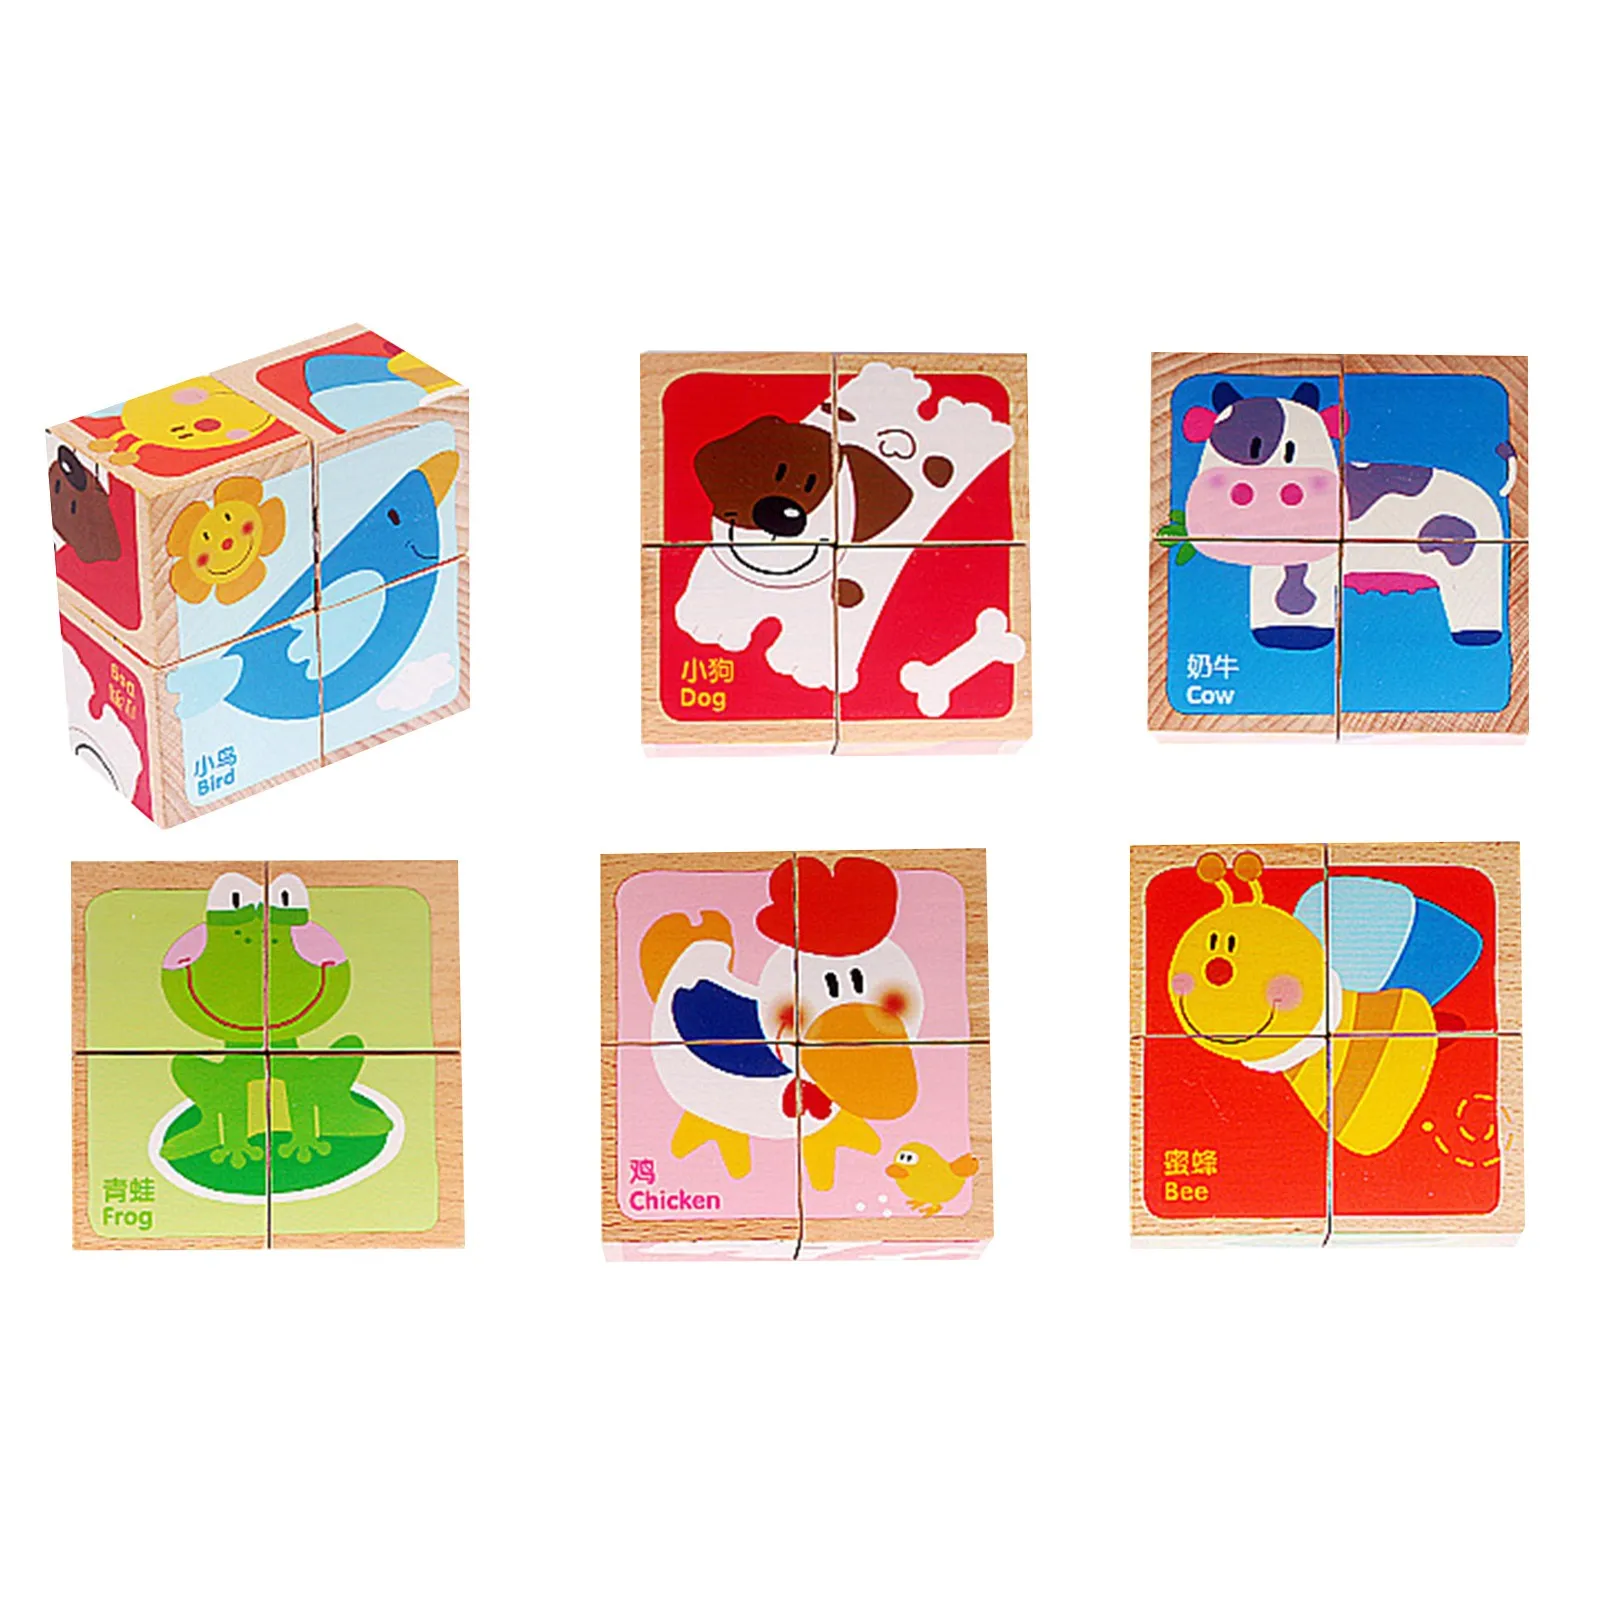 

Six Sided Painting Children's Early Education Enlightenment Puzzle Large Wood Building Toy Games for Toddlers 3-4 Years Old